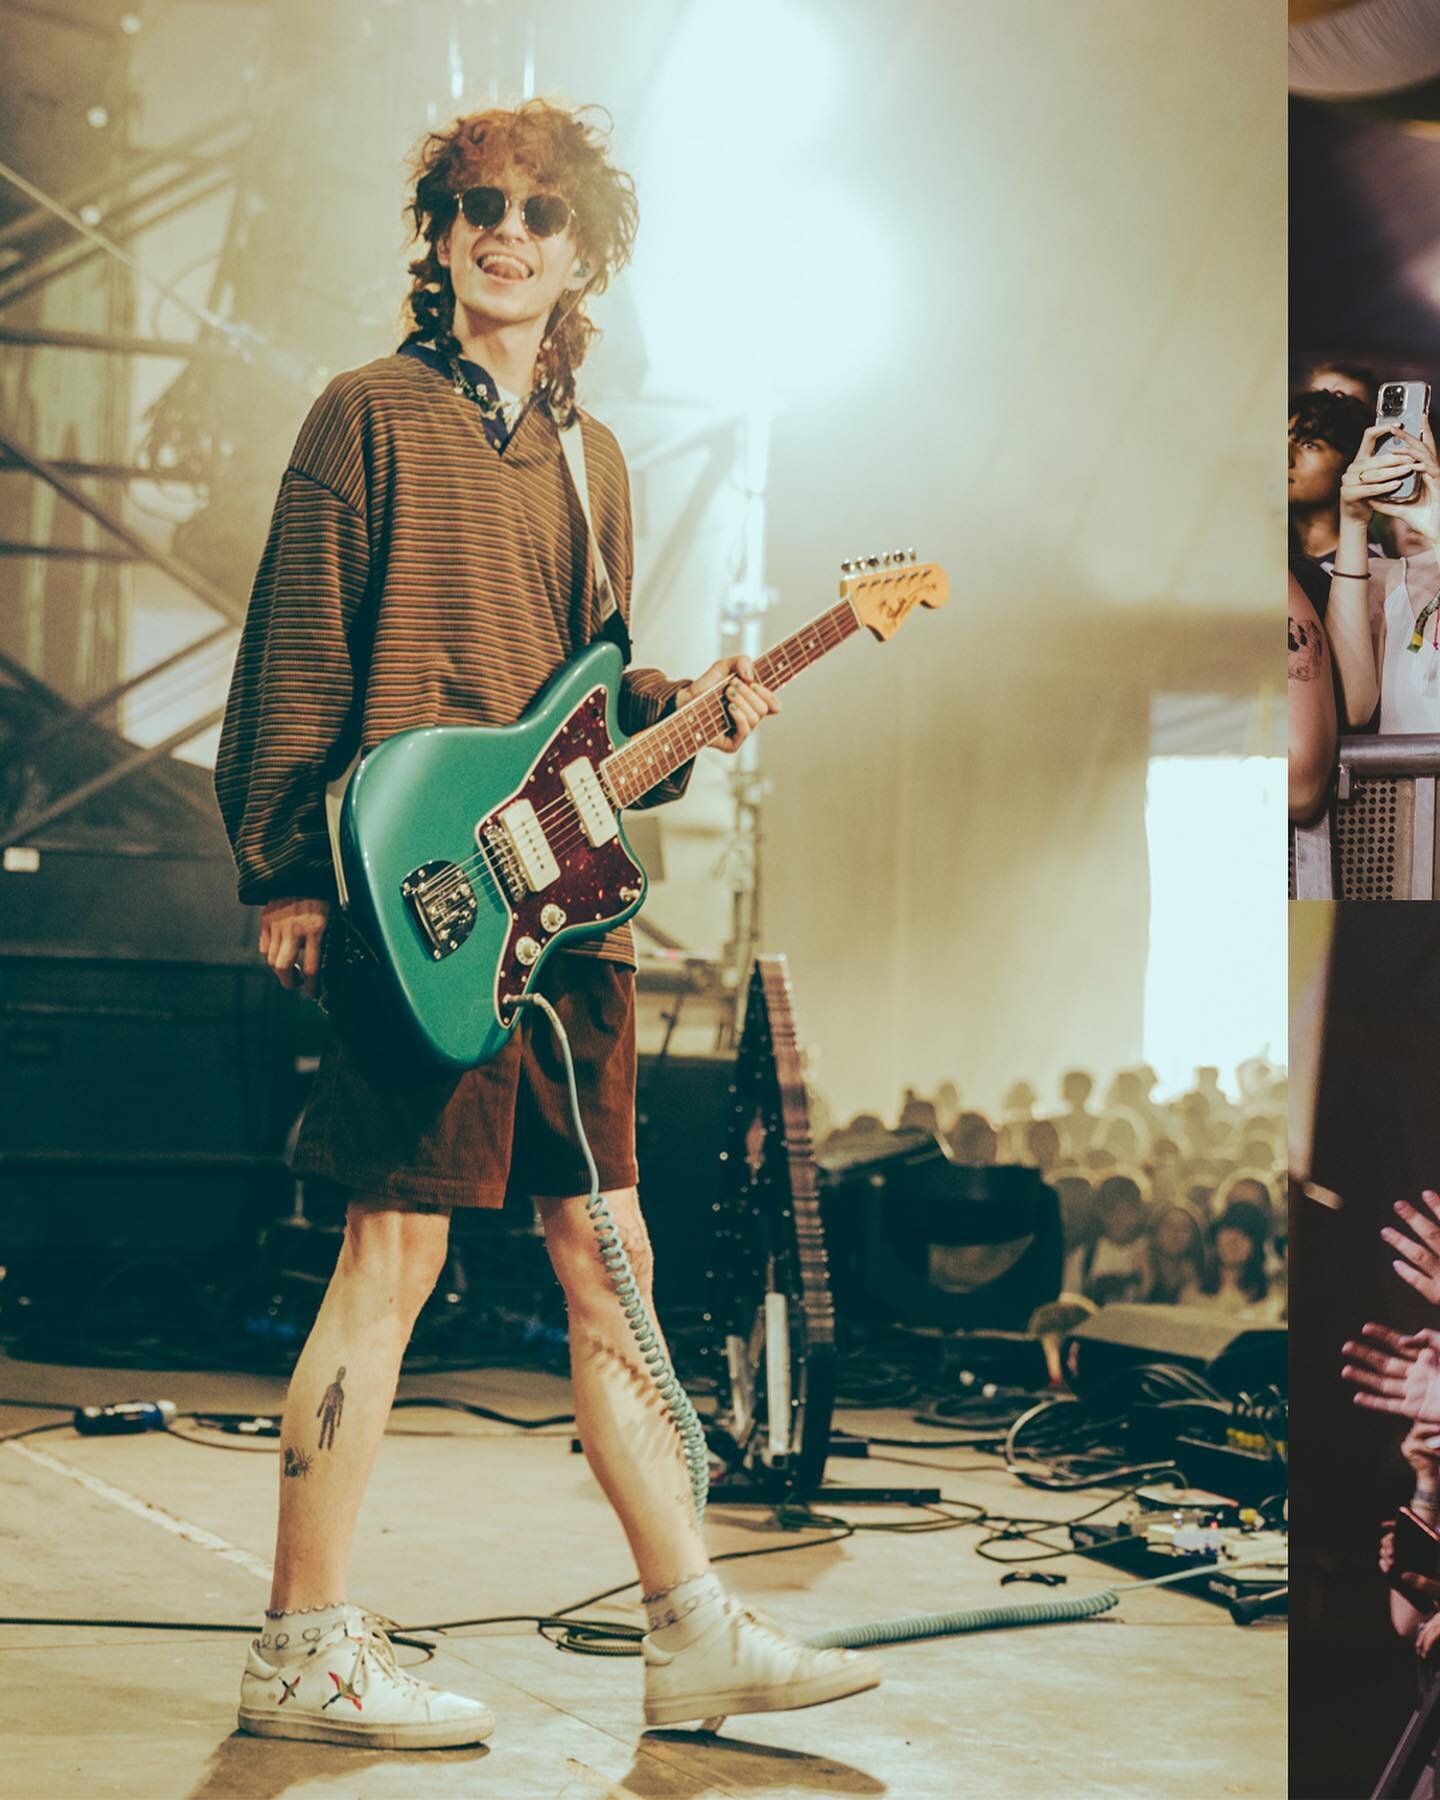 The incredible @lemon.socks at Latitude back in July ✨🥹🤍 I shot Cavetown back in 2019 when I interned for @festivalrepublic - felt really magical to be listening to the same music but know just how far I&rsquo;ve come photography wise, in the last 